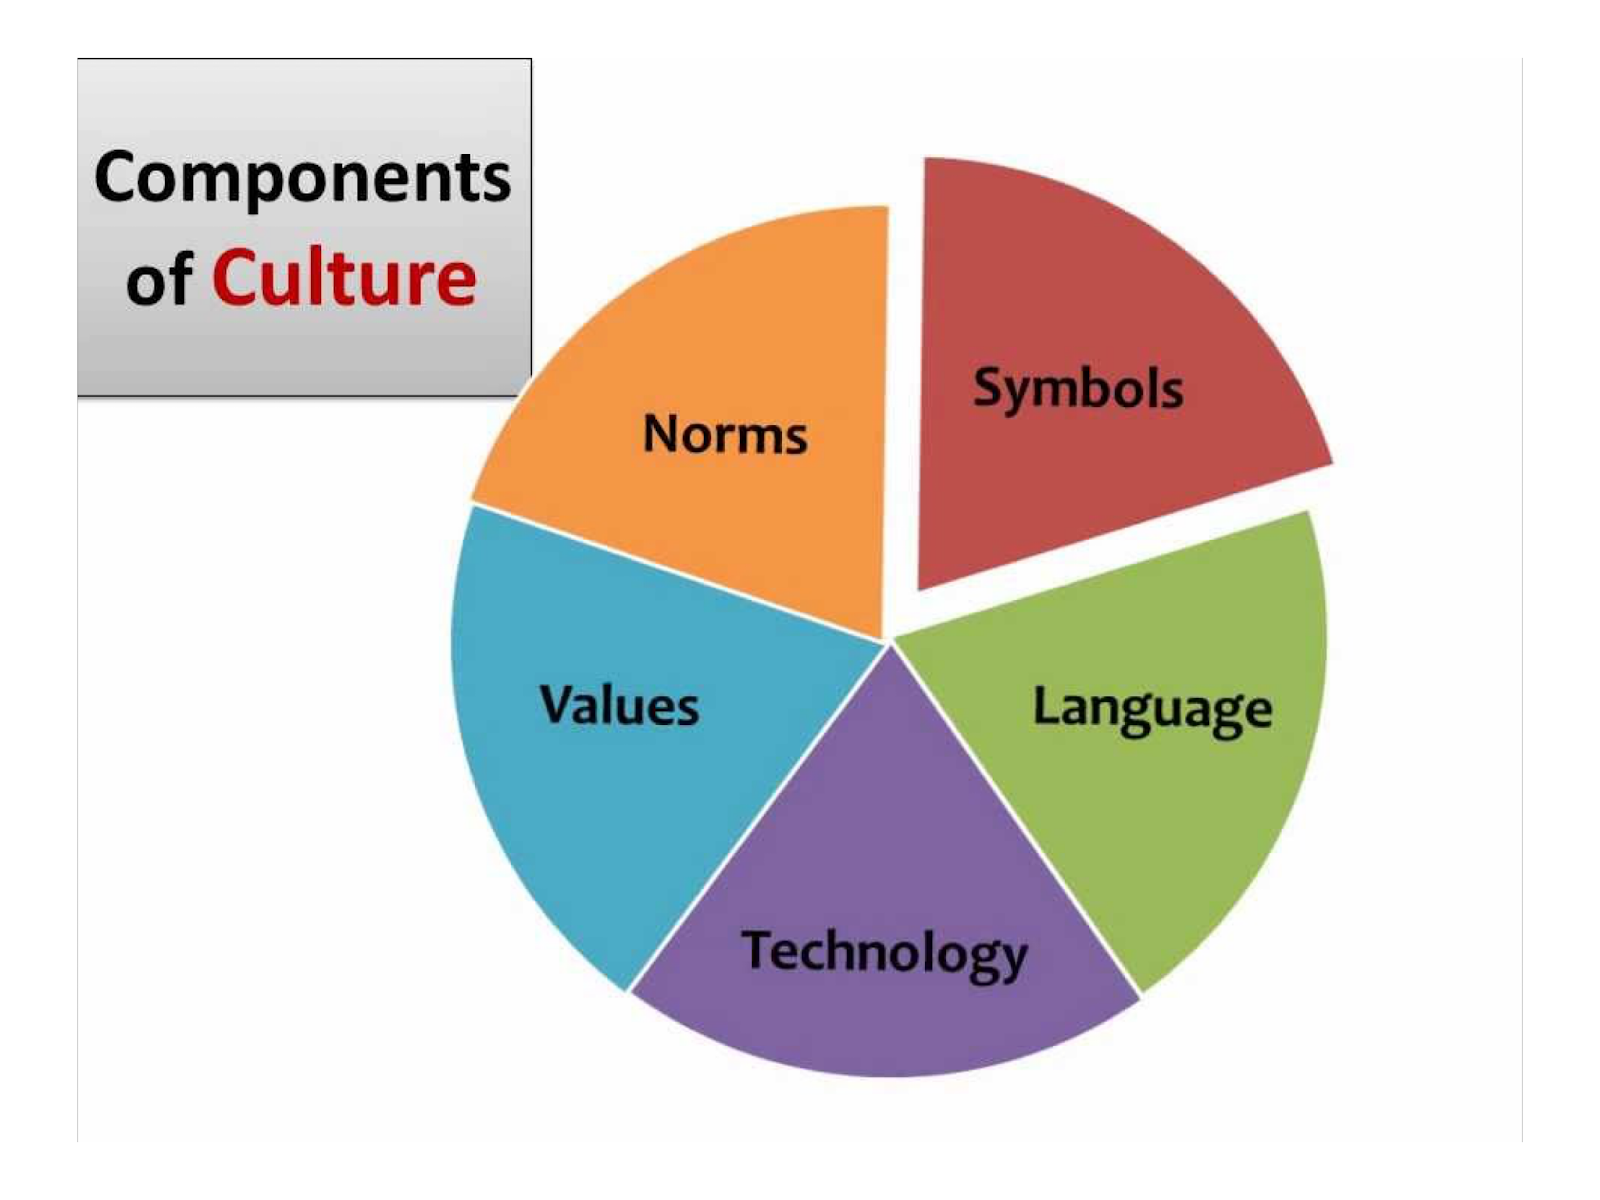 Cultural values. Components of Culture. The Concept of Culture. Components of Culture values. Culture and values.